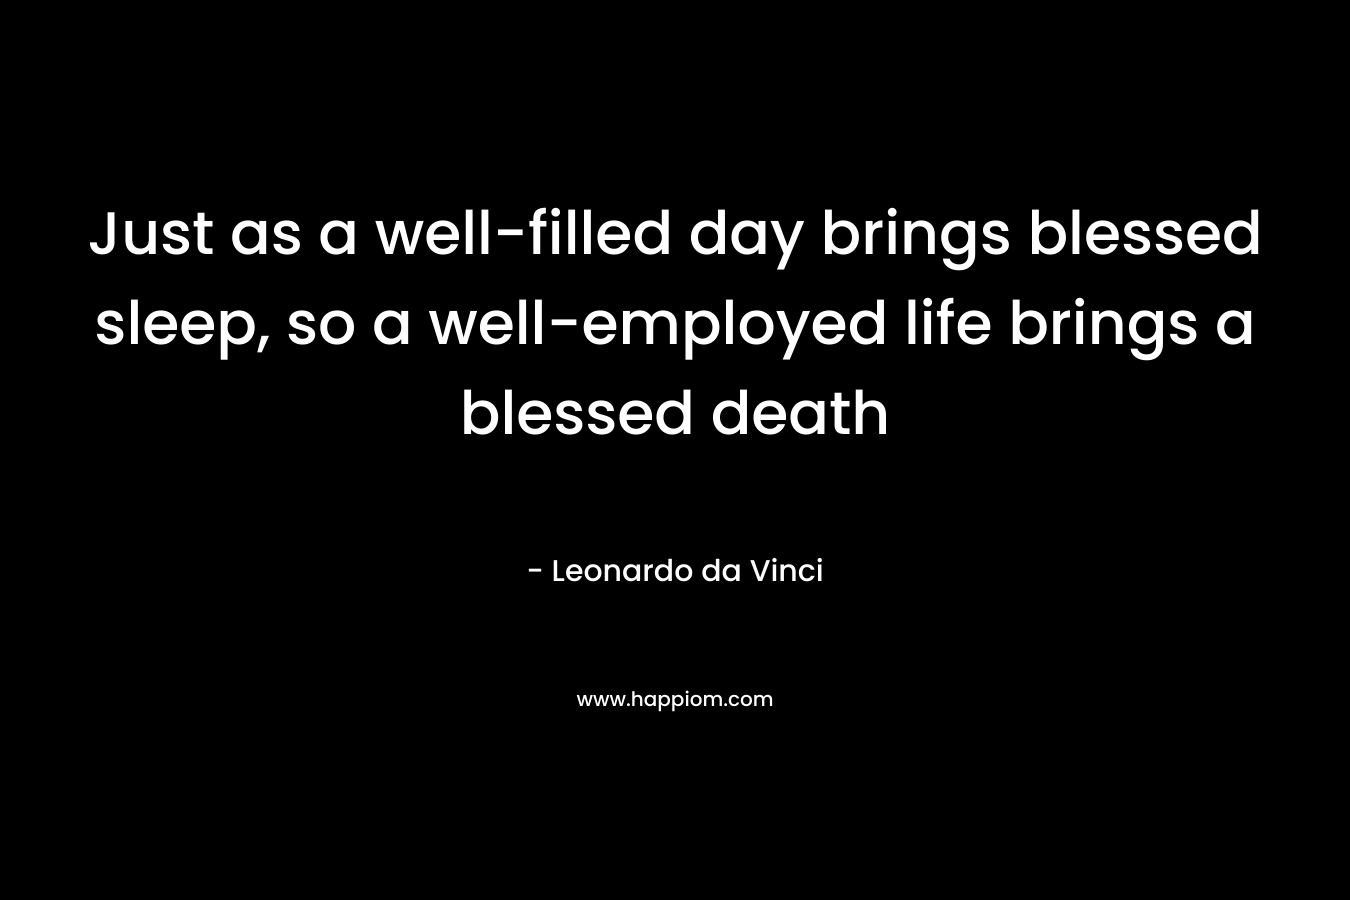 Just as a well-filled day brings blessed sleep, so a well-employed life brings a blessed death